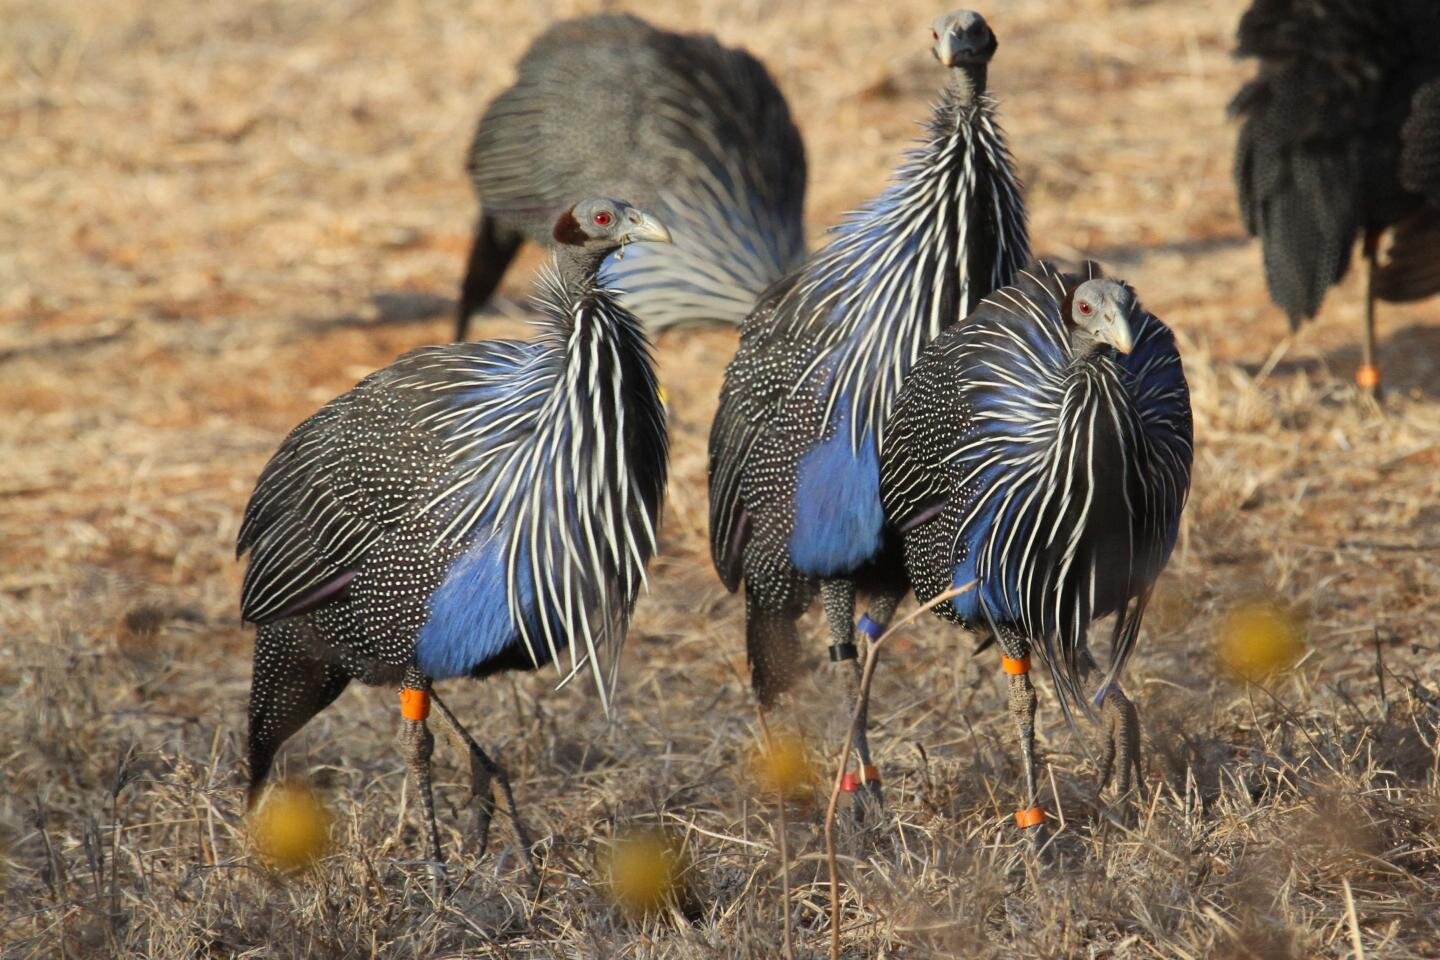 The Vulturine Guinea Fowl of Kenya spend the day scraping the ground